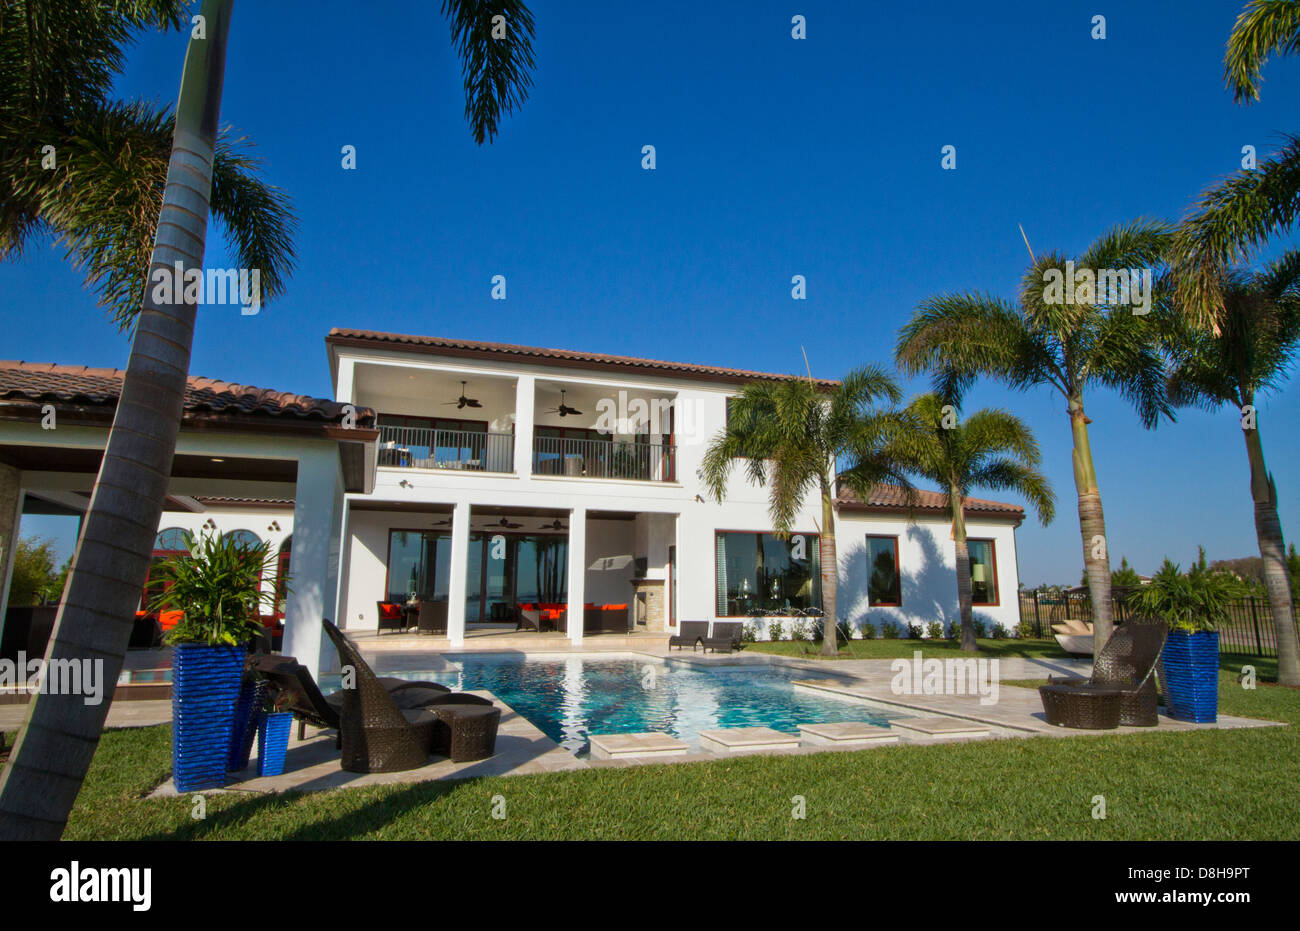 Luxury Home worth several million dollars pool with palm trees and blue sky Stock Photo